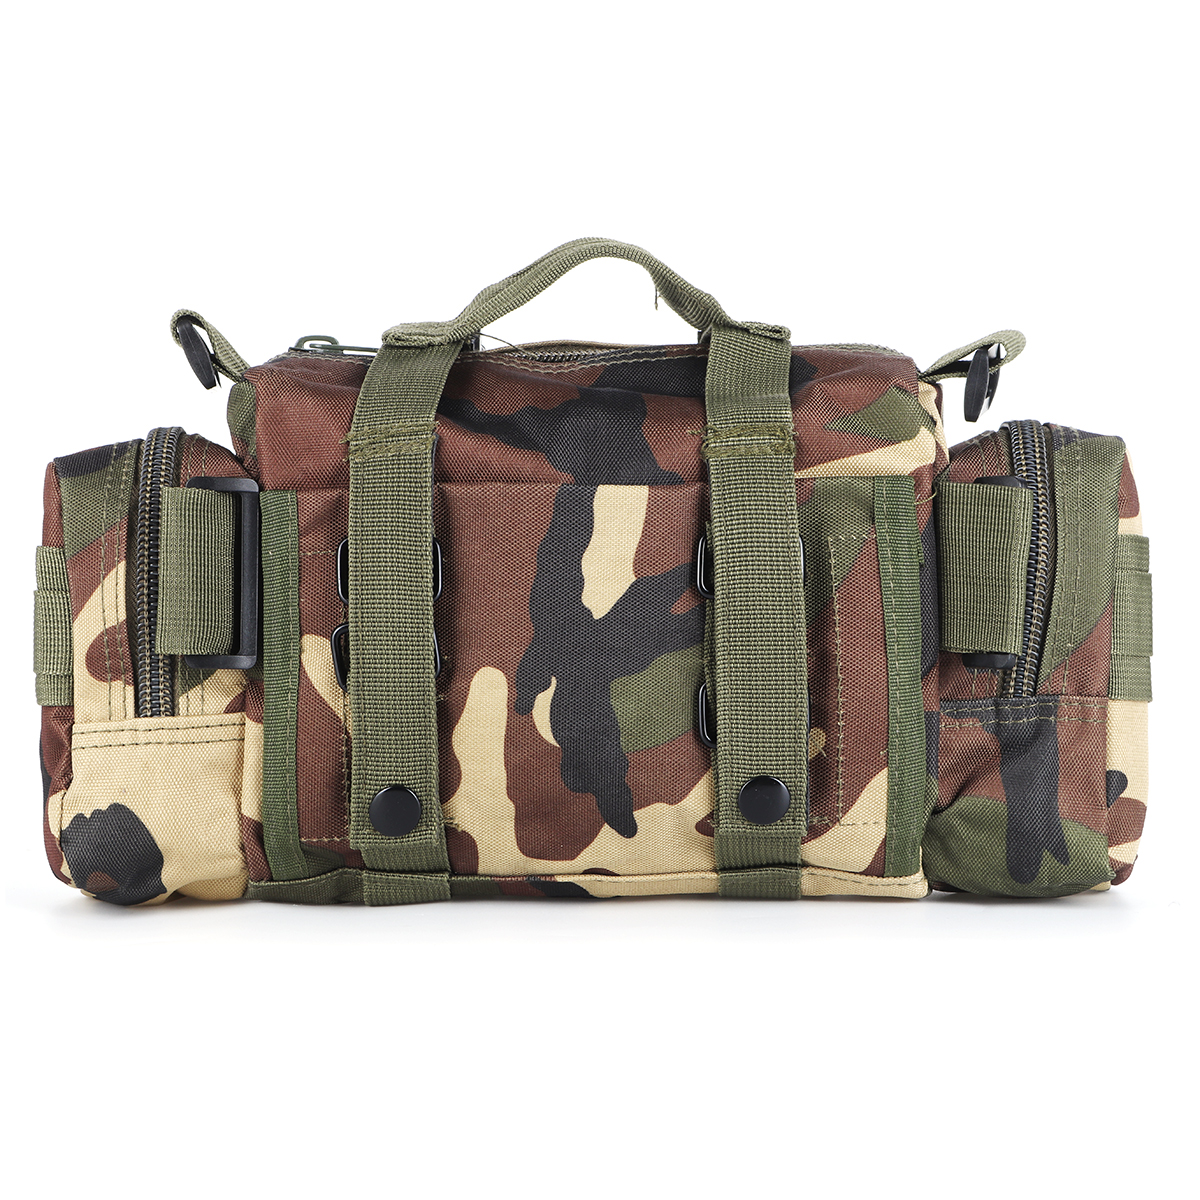 Multifunctional-Outdoor-Sports-Hiking-with-Zippers-Nylon-Oxford-Cloth-Tactical-Shoulder-Bag-Waist-Pa-1825563-13